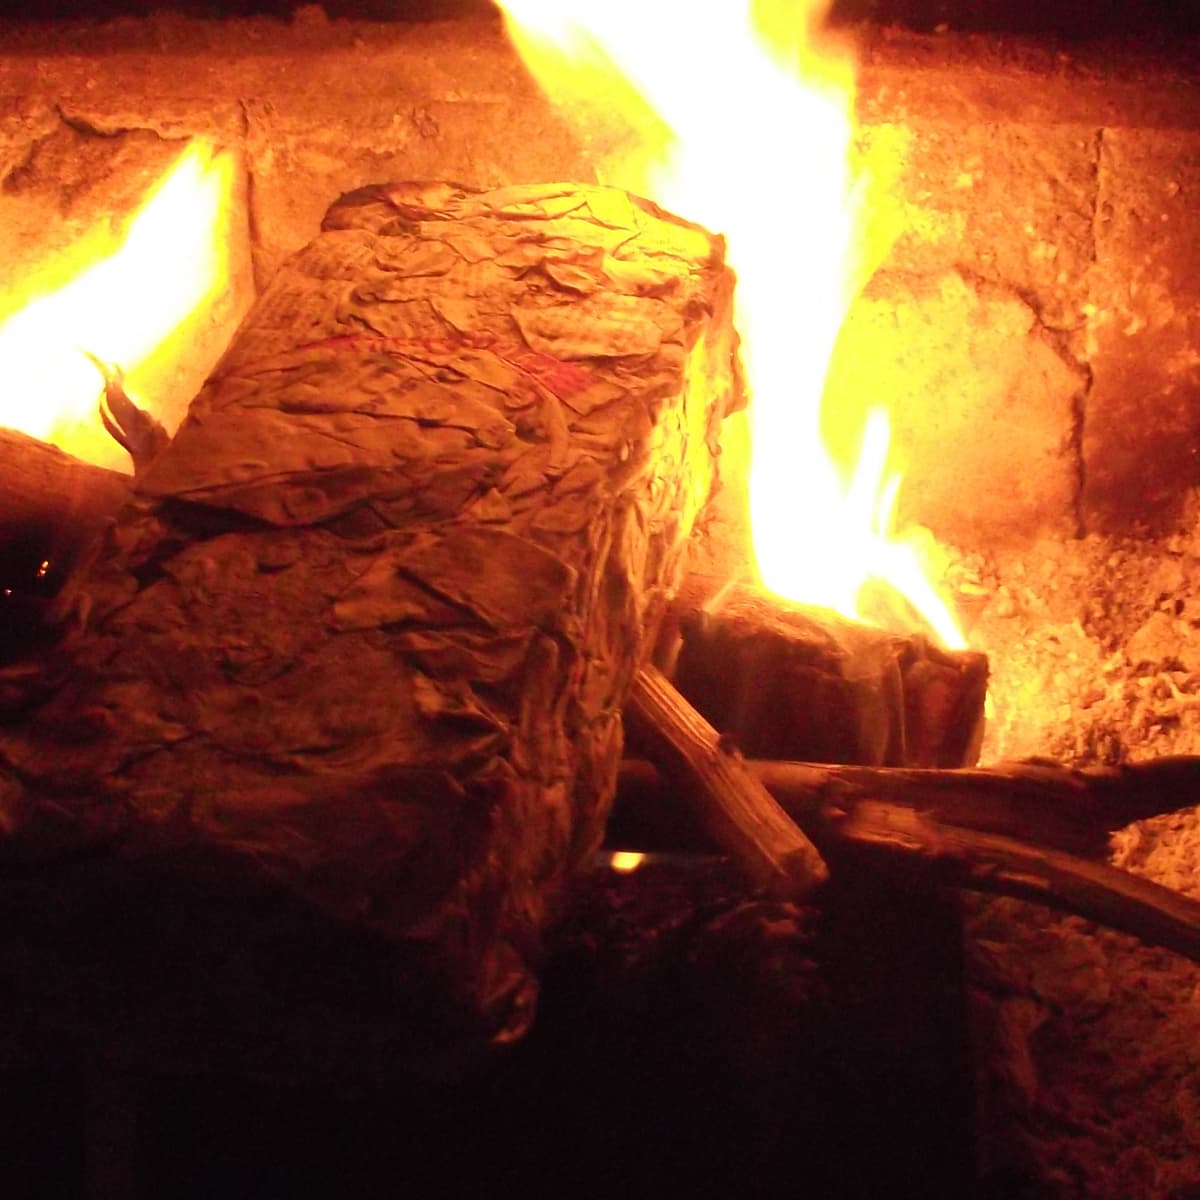 Does a Wood Stove Need Fire Brick? - Woodsy Acres